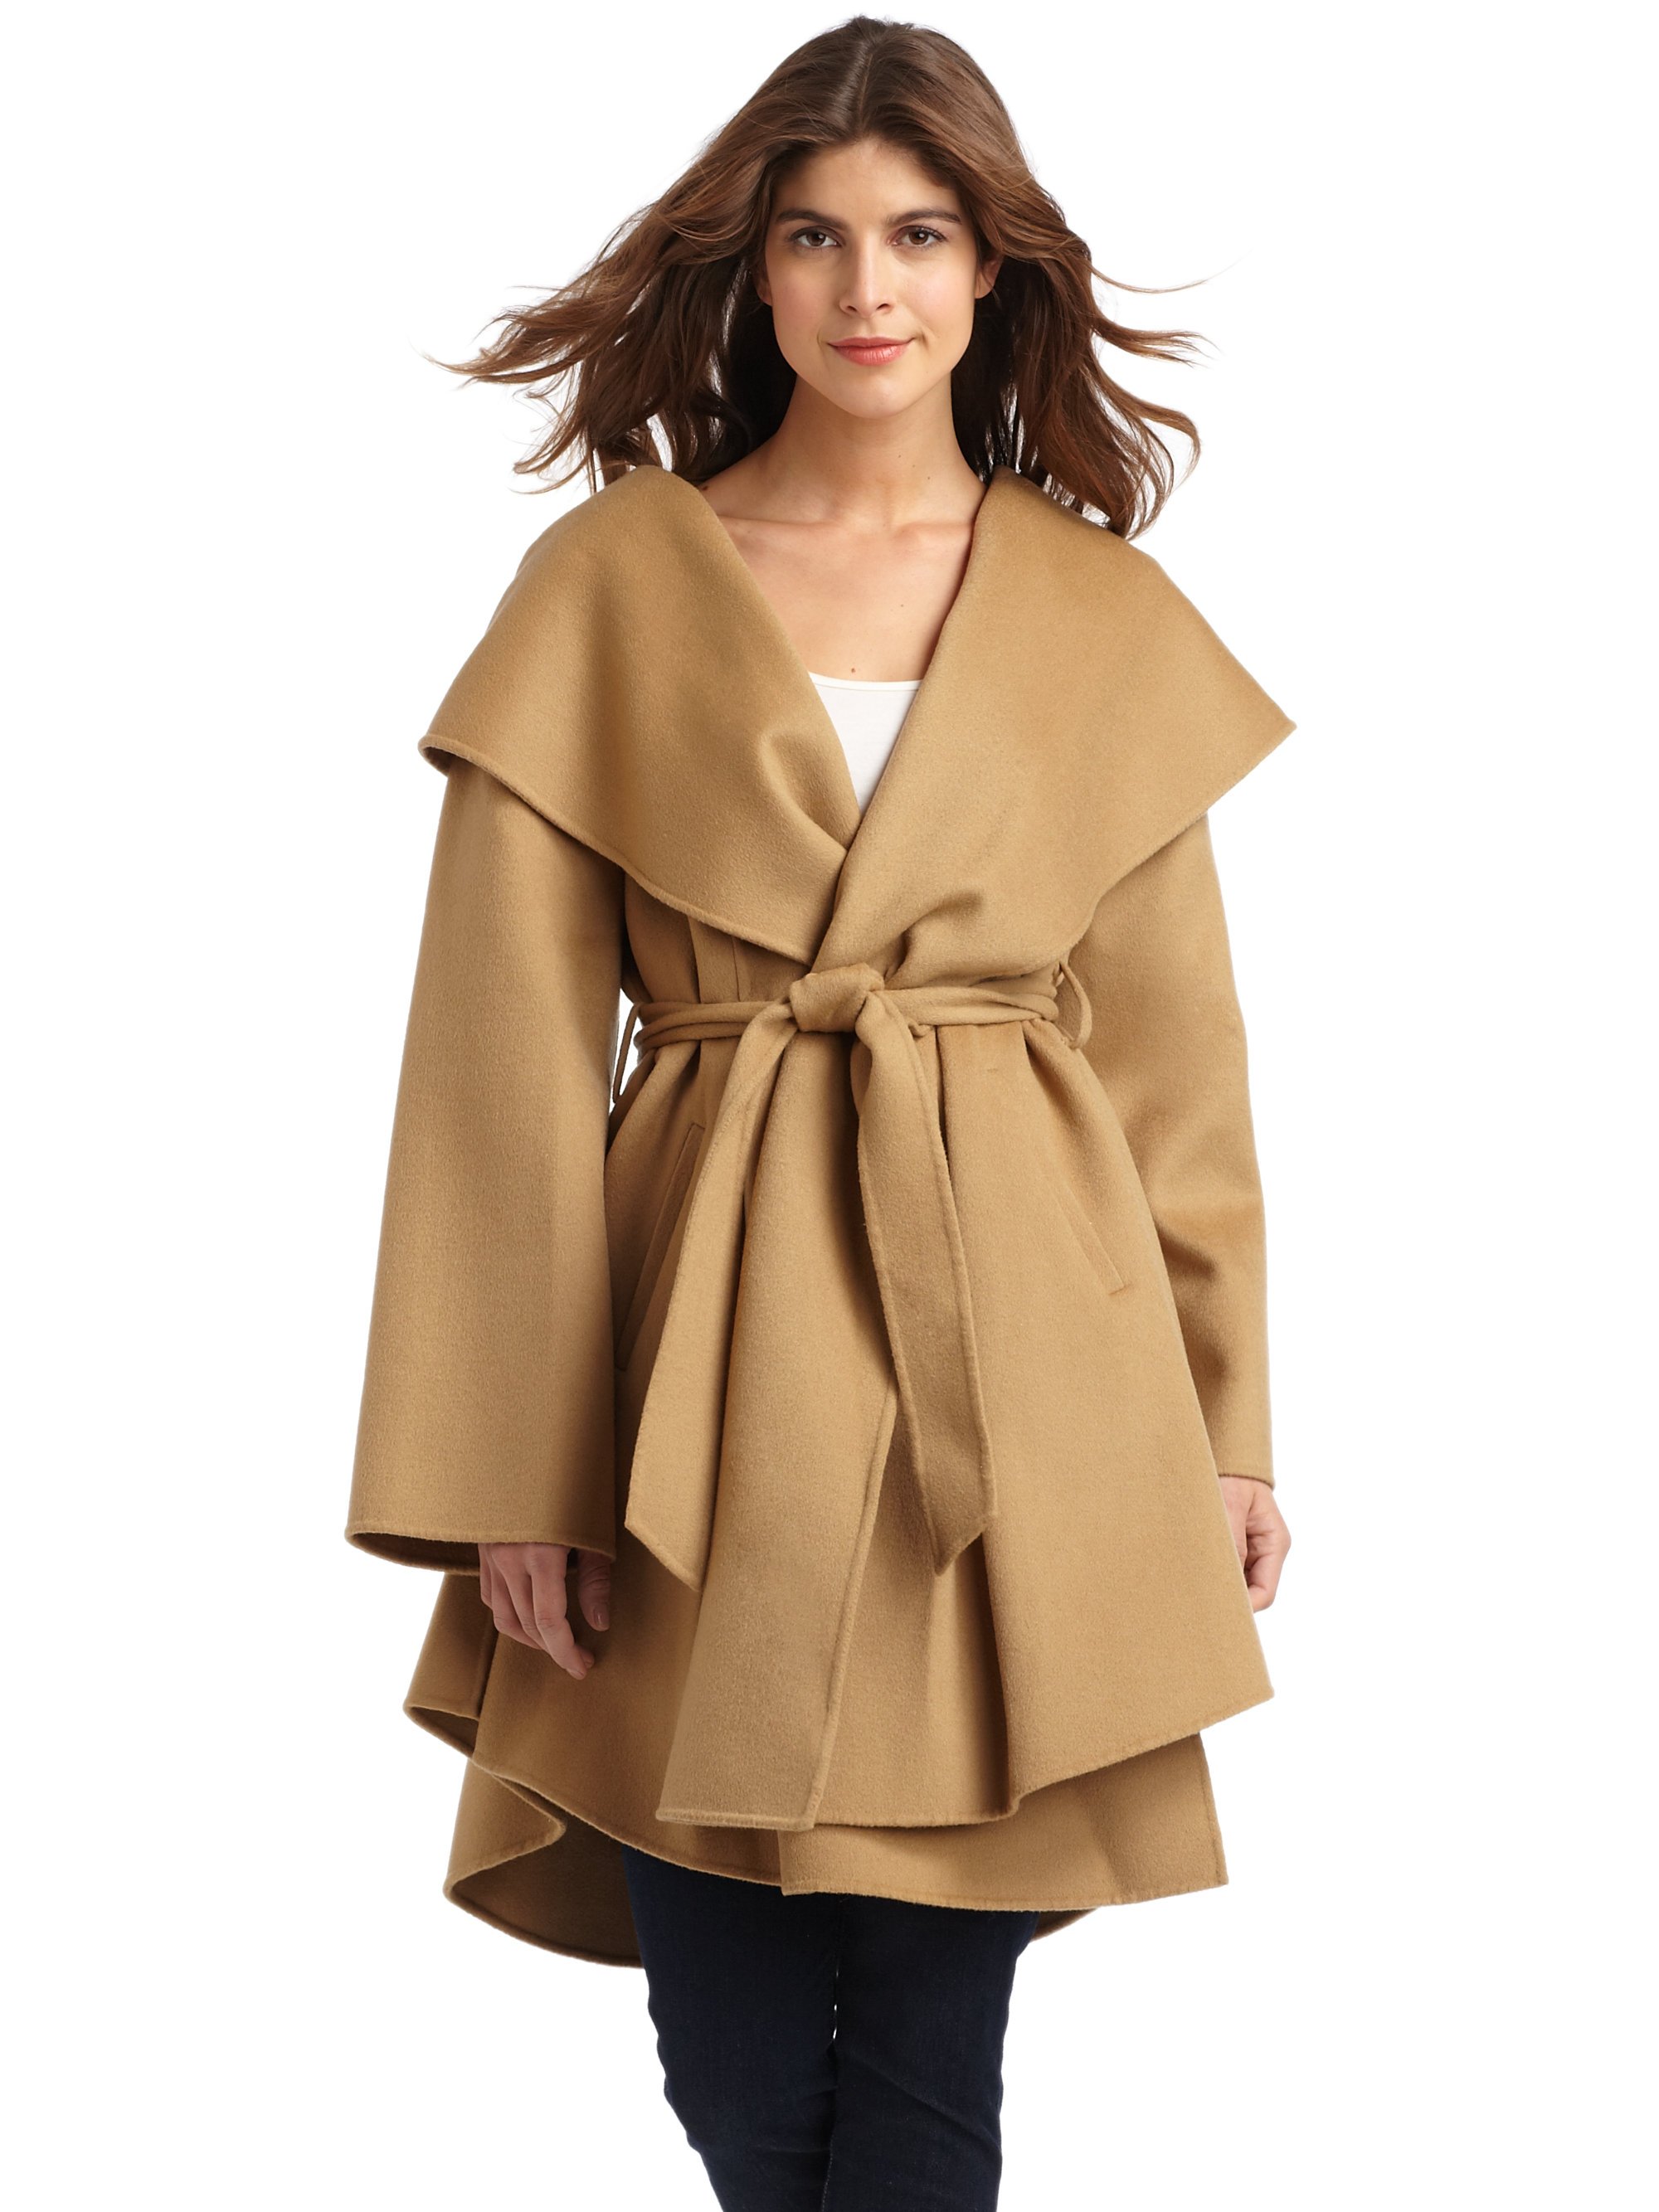 Dawn levy Wool Cashmere Wrap Coat in Brown | Lyst